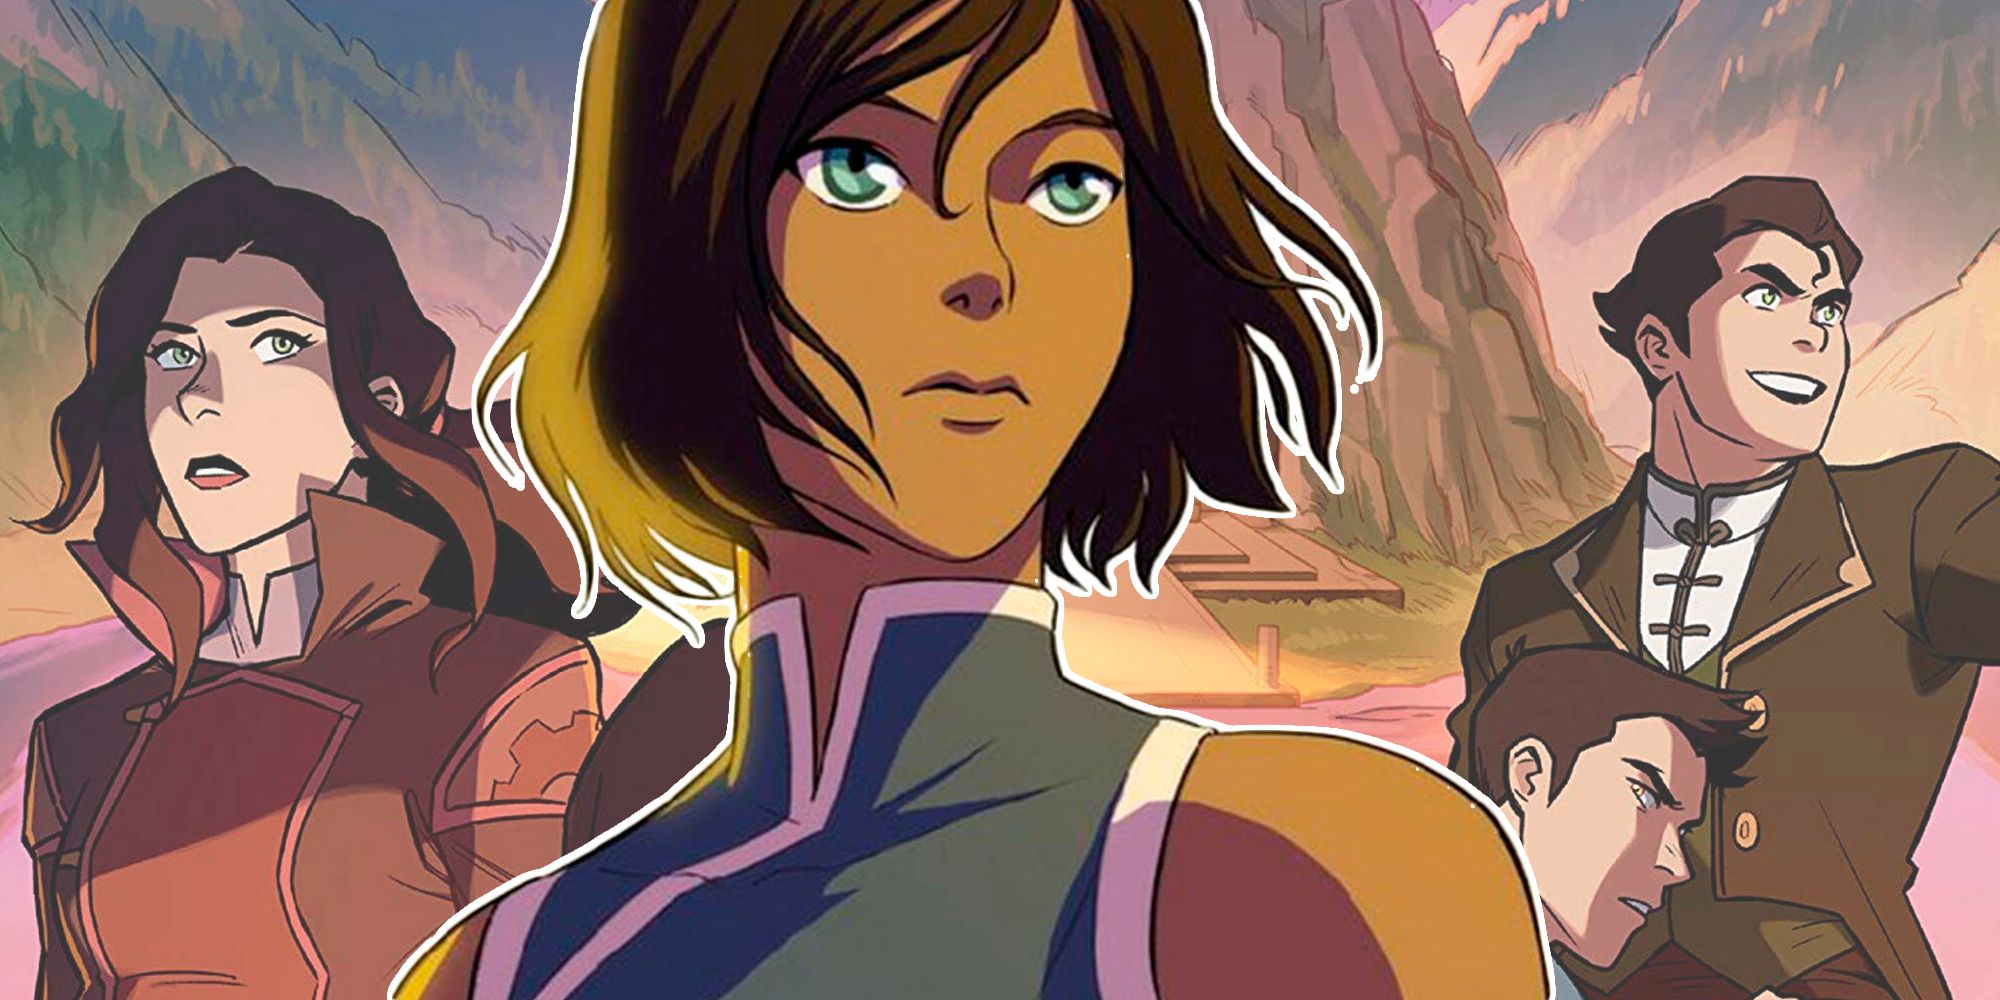 A blended image features Asami, Korra, Mako, and Bolin from The Legend of Korra comics